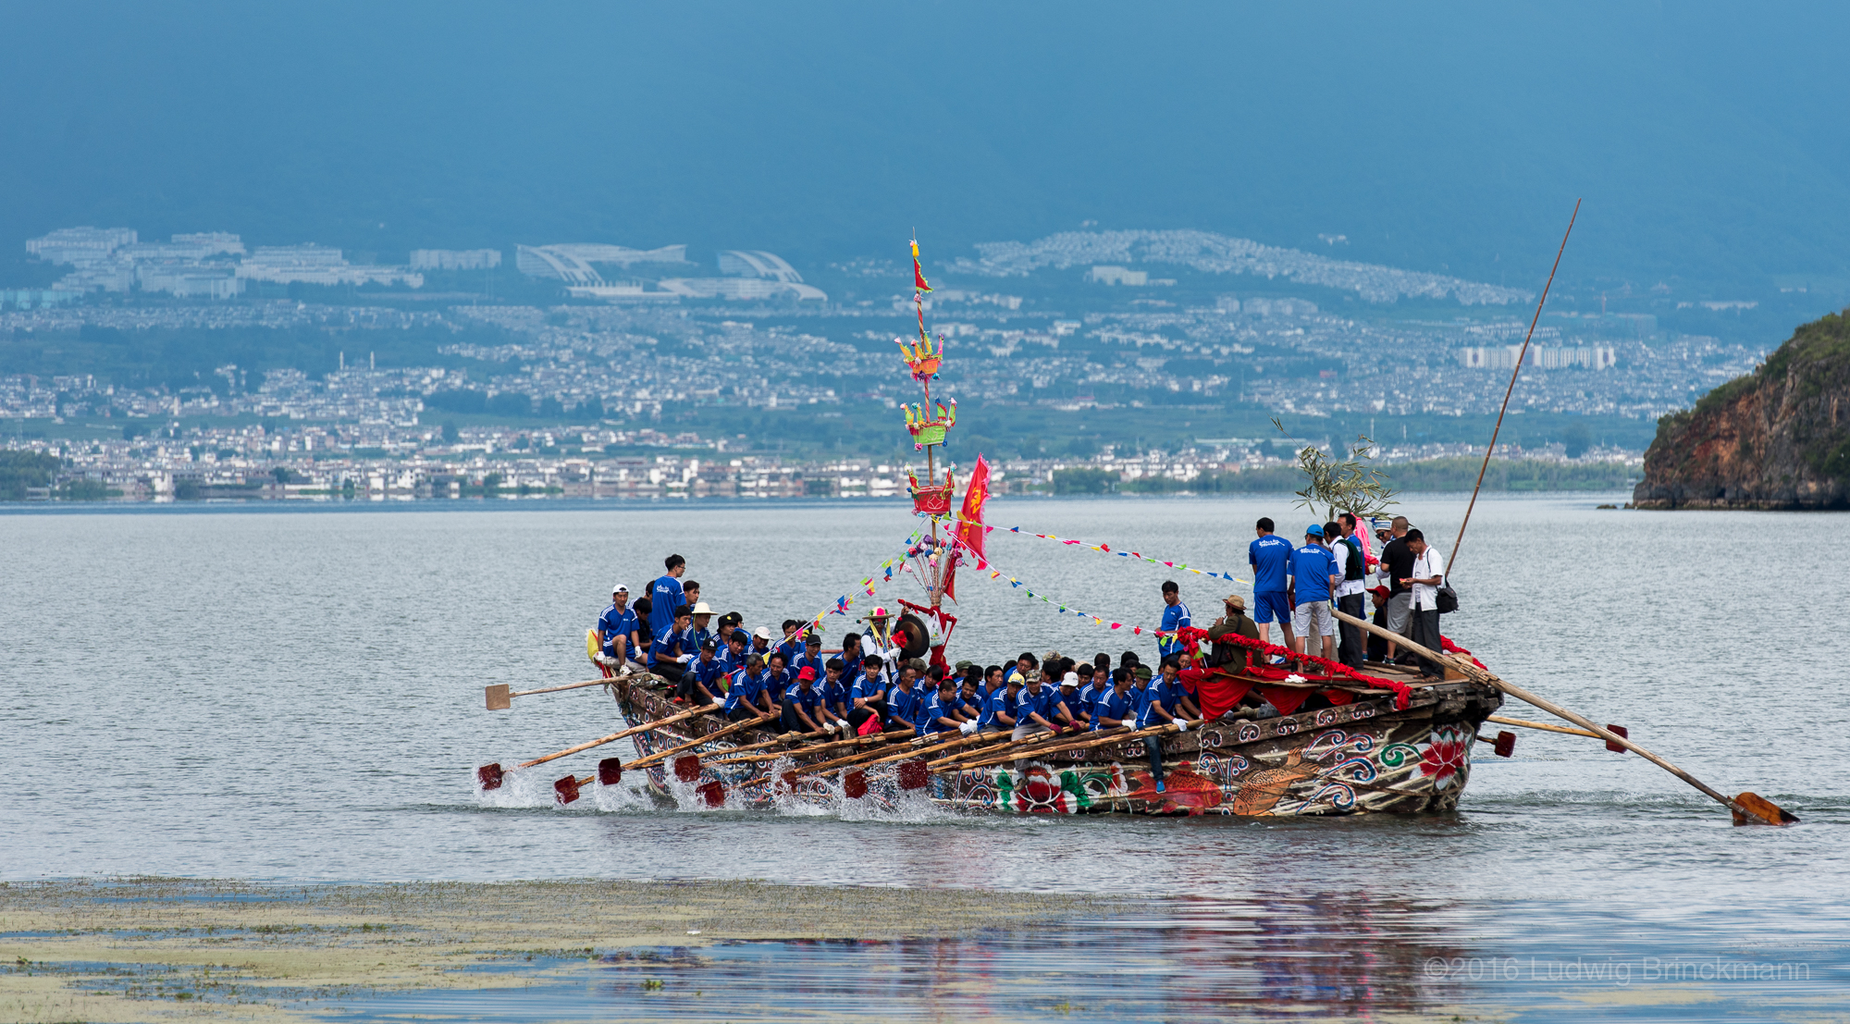 Picture: Dali's dragon boat races were held on the day of the Torch Festival.